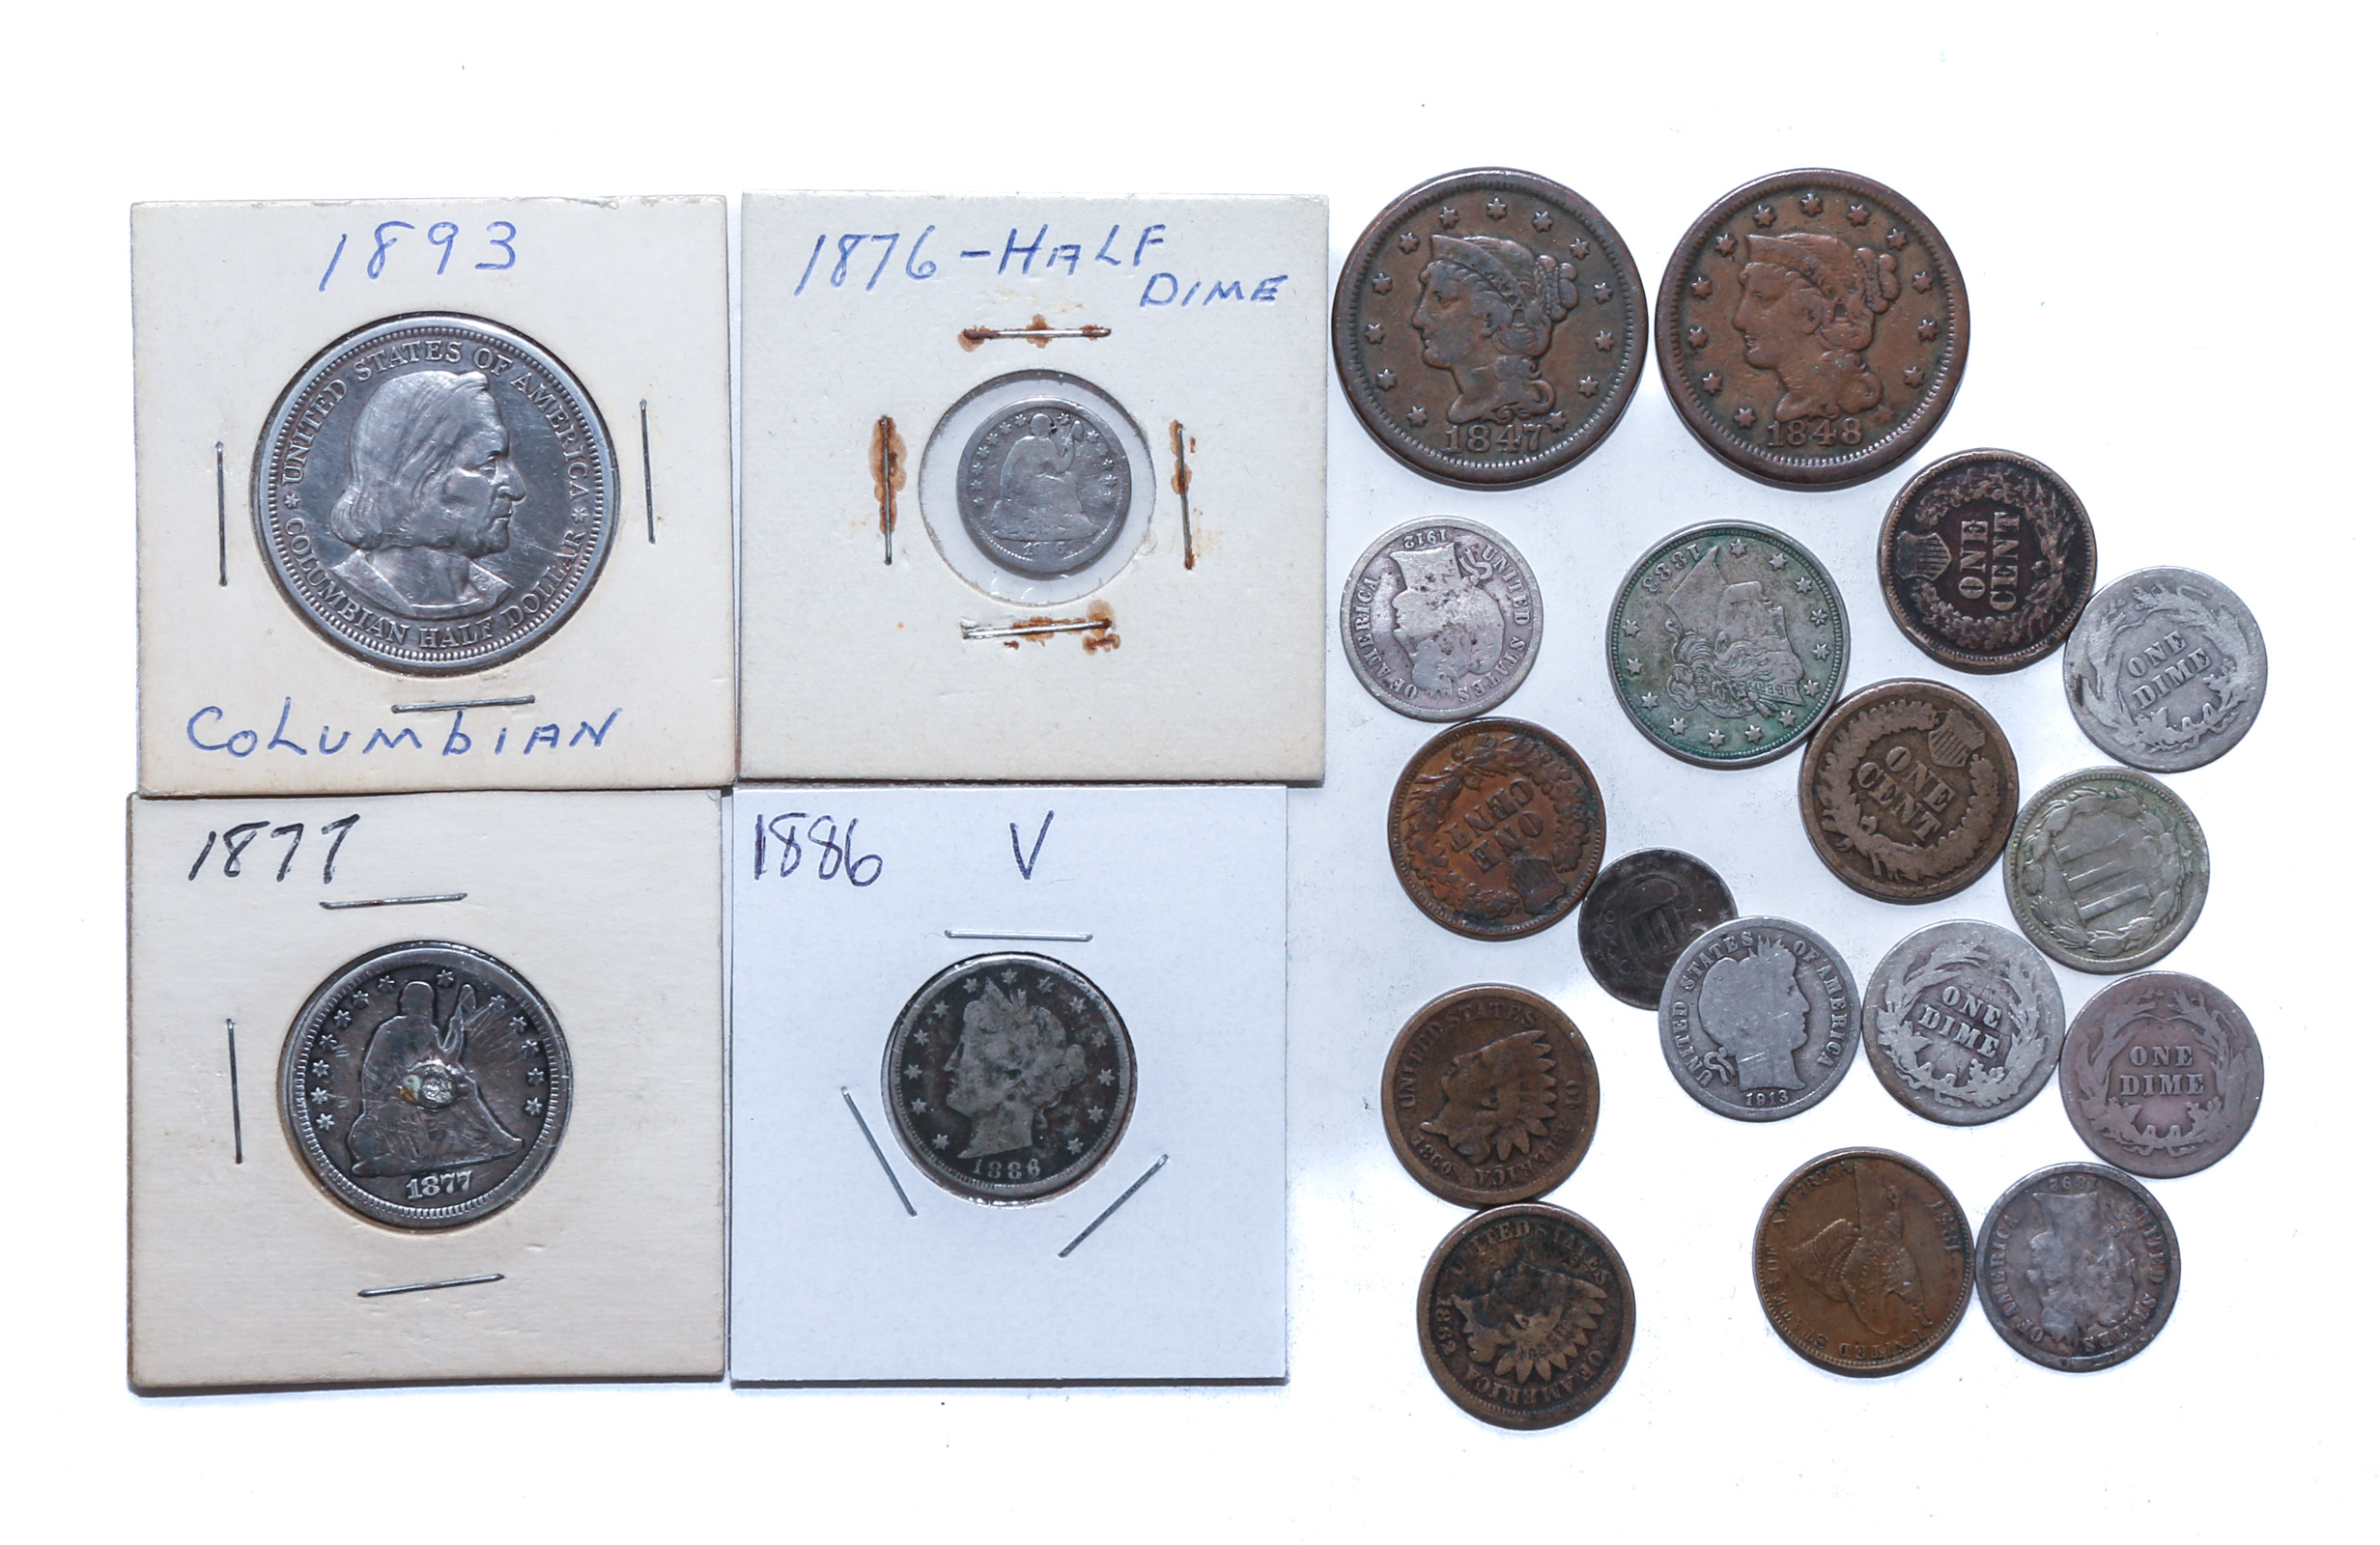 21 US TYPE COINS WITH BETTER DATE